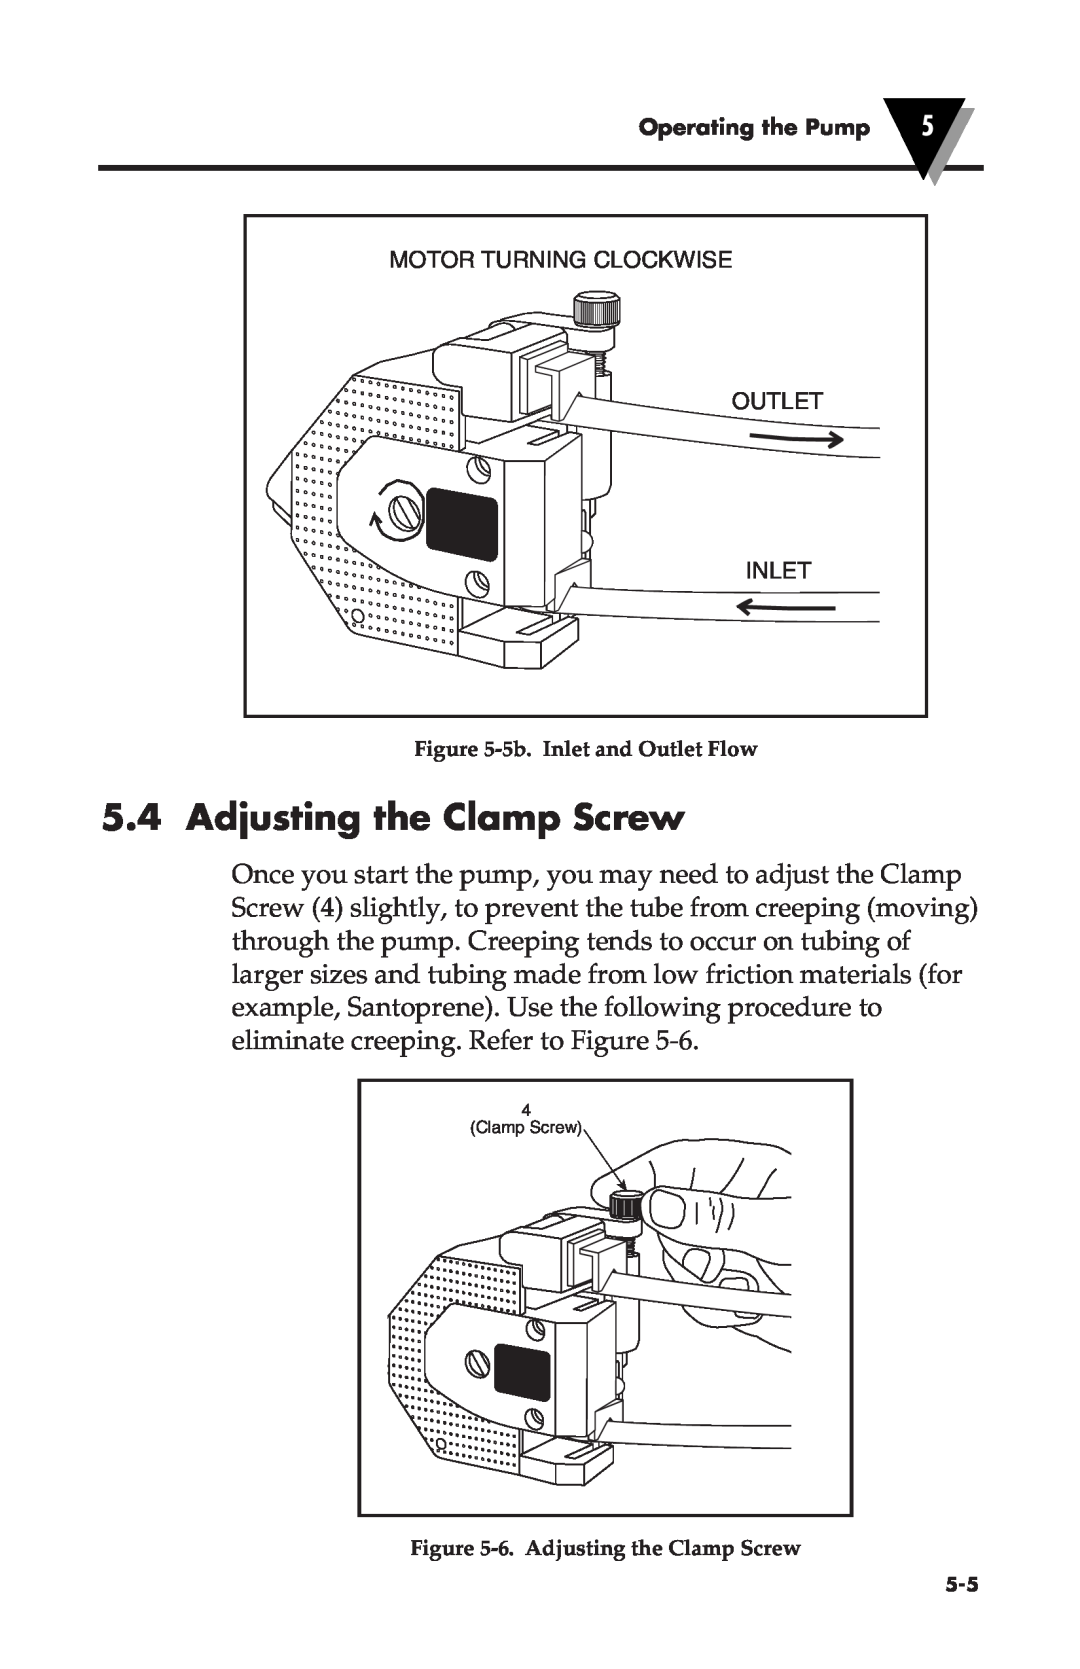 Omega Vehicle Security FPU500 manual 5b.Inlet and Outlet Flow, 6.Adjusting the Clamp Screw 